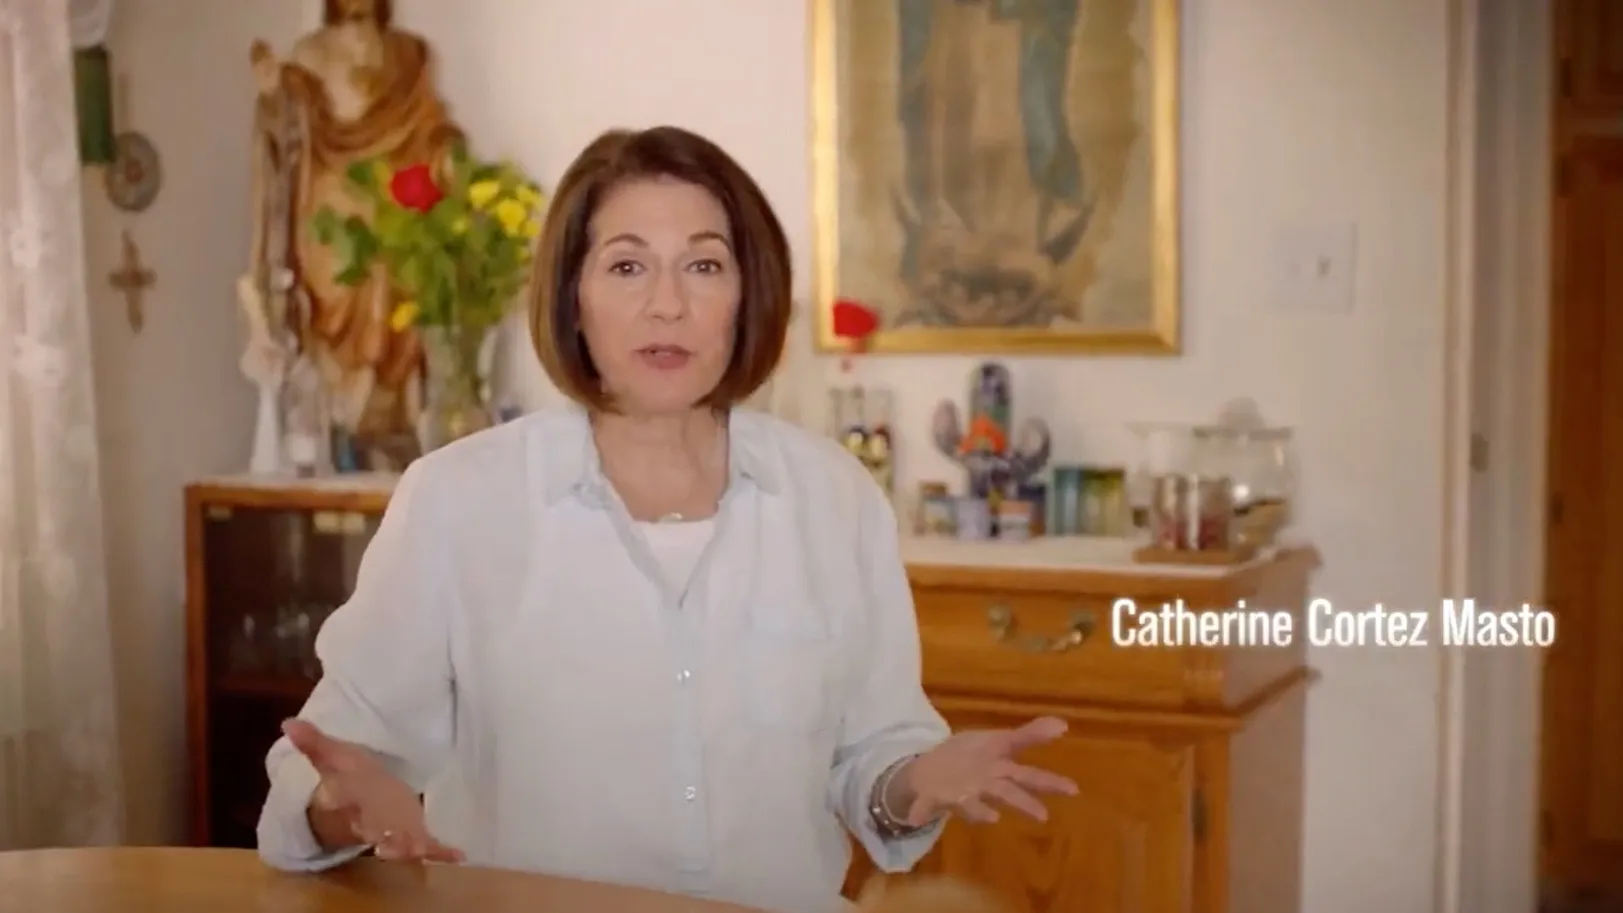 U.S. Sen. Catherine Cortez Masto (D-Nevada), who is a strong supporter of legalized abortion, speaks in a campaign ad with a statue of Jesus and a painting of Our Lady of Guadalupe in the background.?w=200&h=150